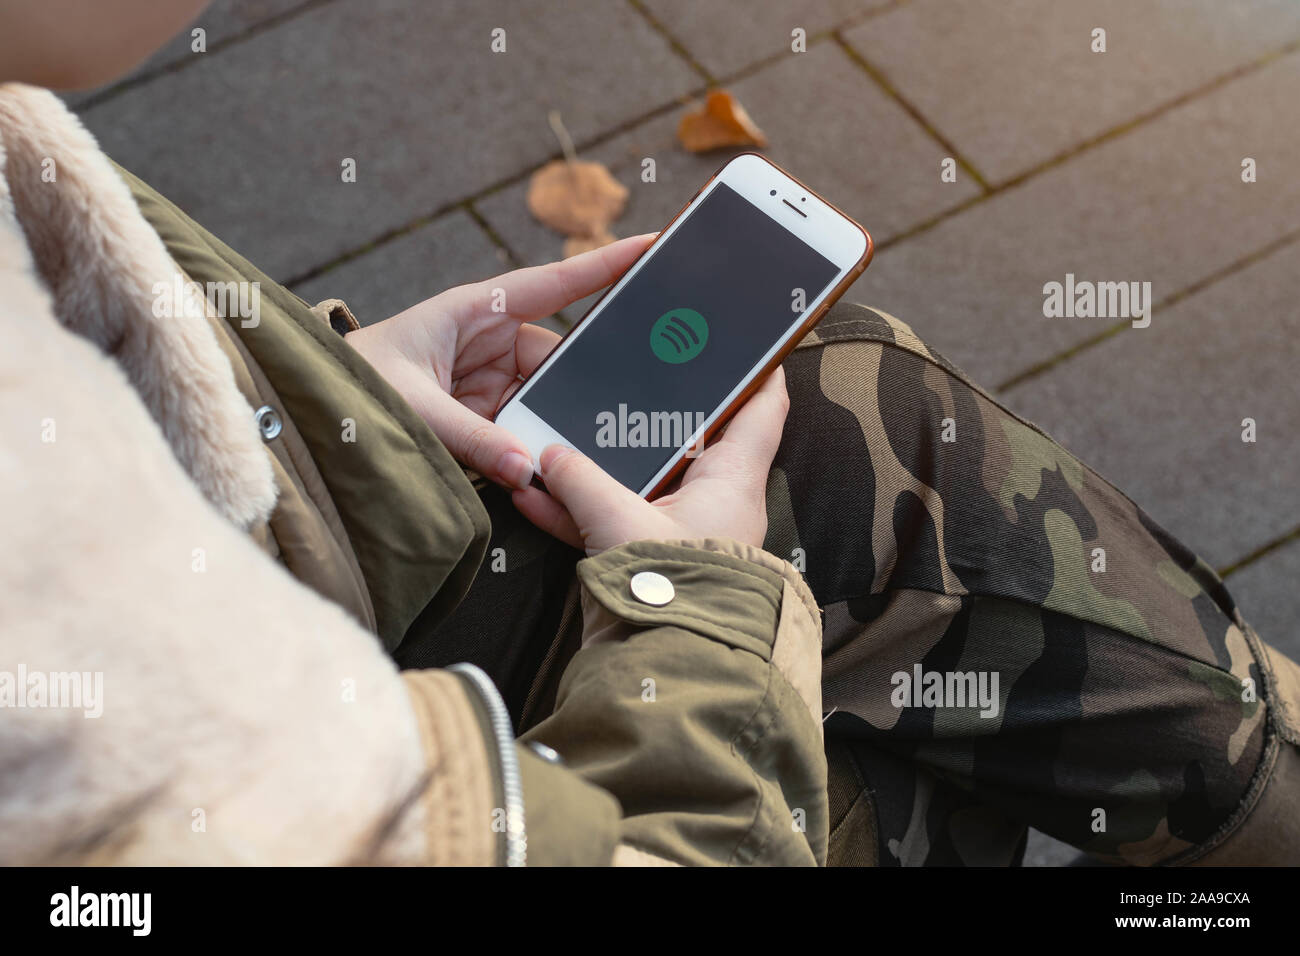 Woman holding a phone in the hands. Spotify logo on the cellphone screen. Stock Photo